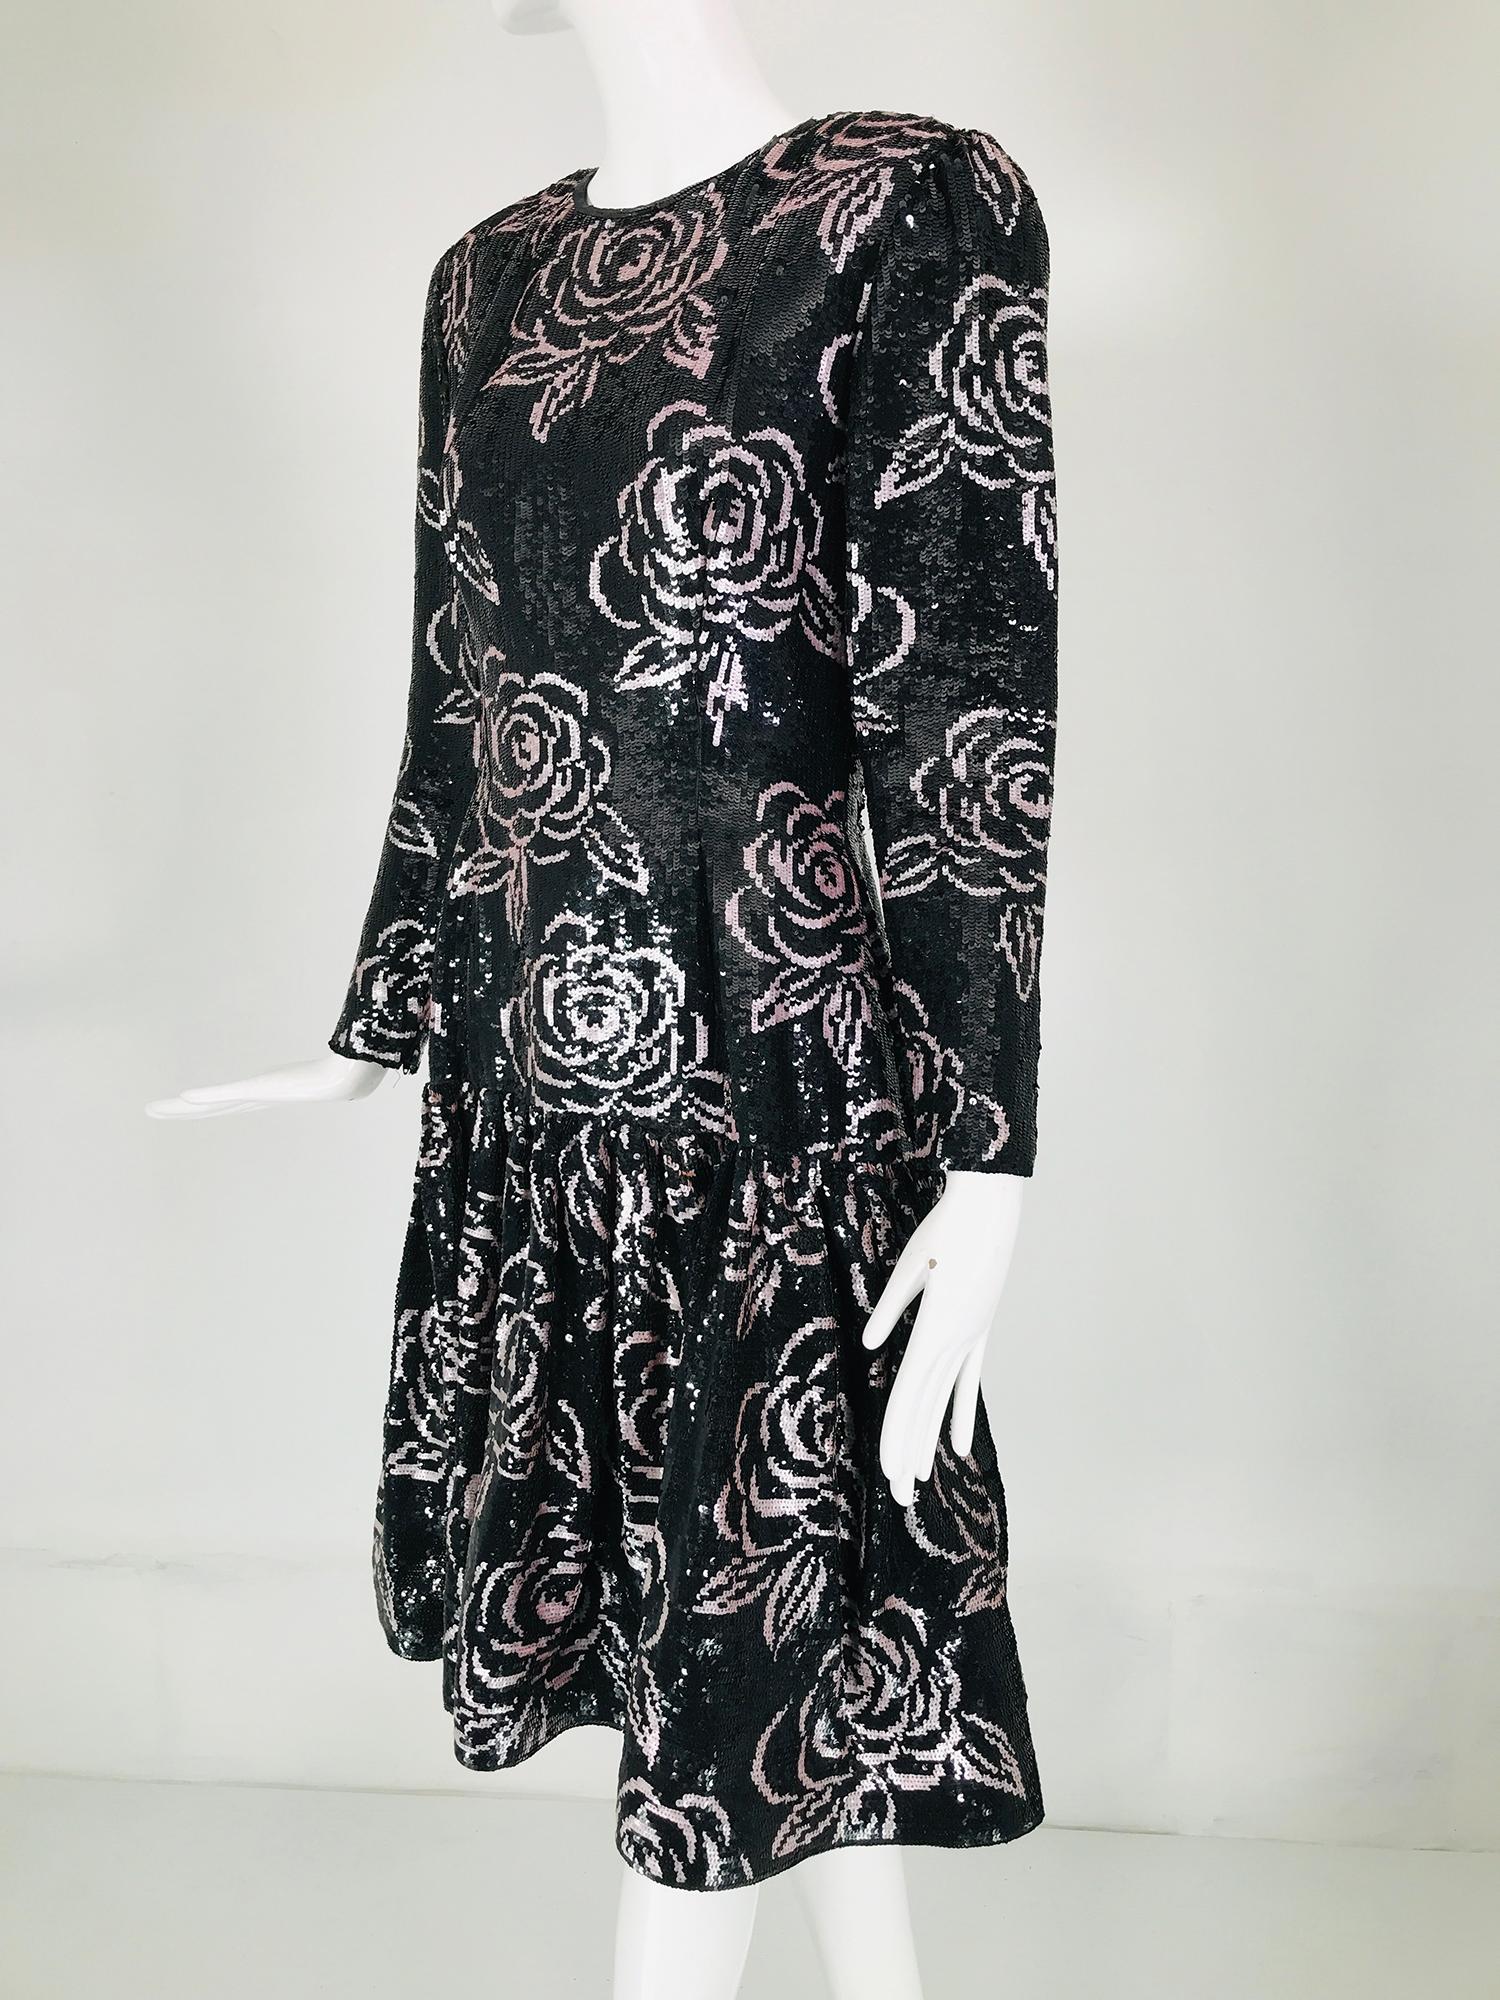 Oscar de la Renta black sequin encrusted dress with pale pink roses done in outlined sequins throughout, from the 1980s Jewel neck evening dress with princess seams, long sleeves that closes at each cuff with a zipper. The dress is fitted through